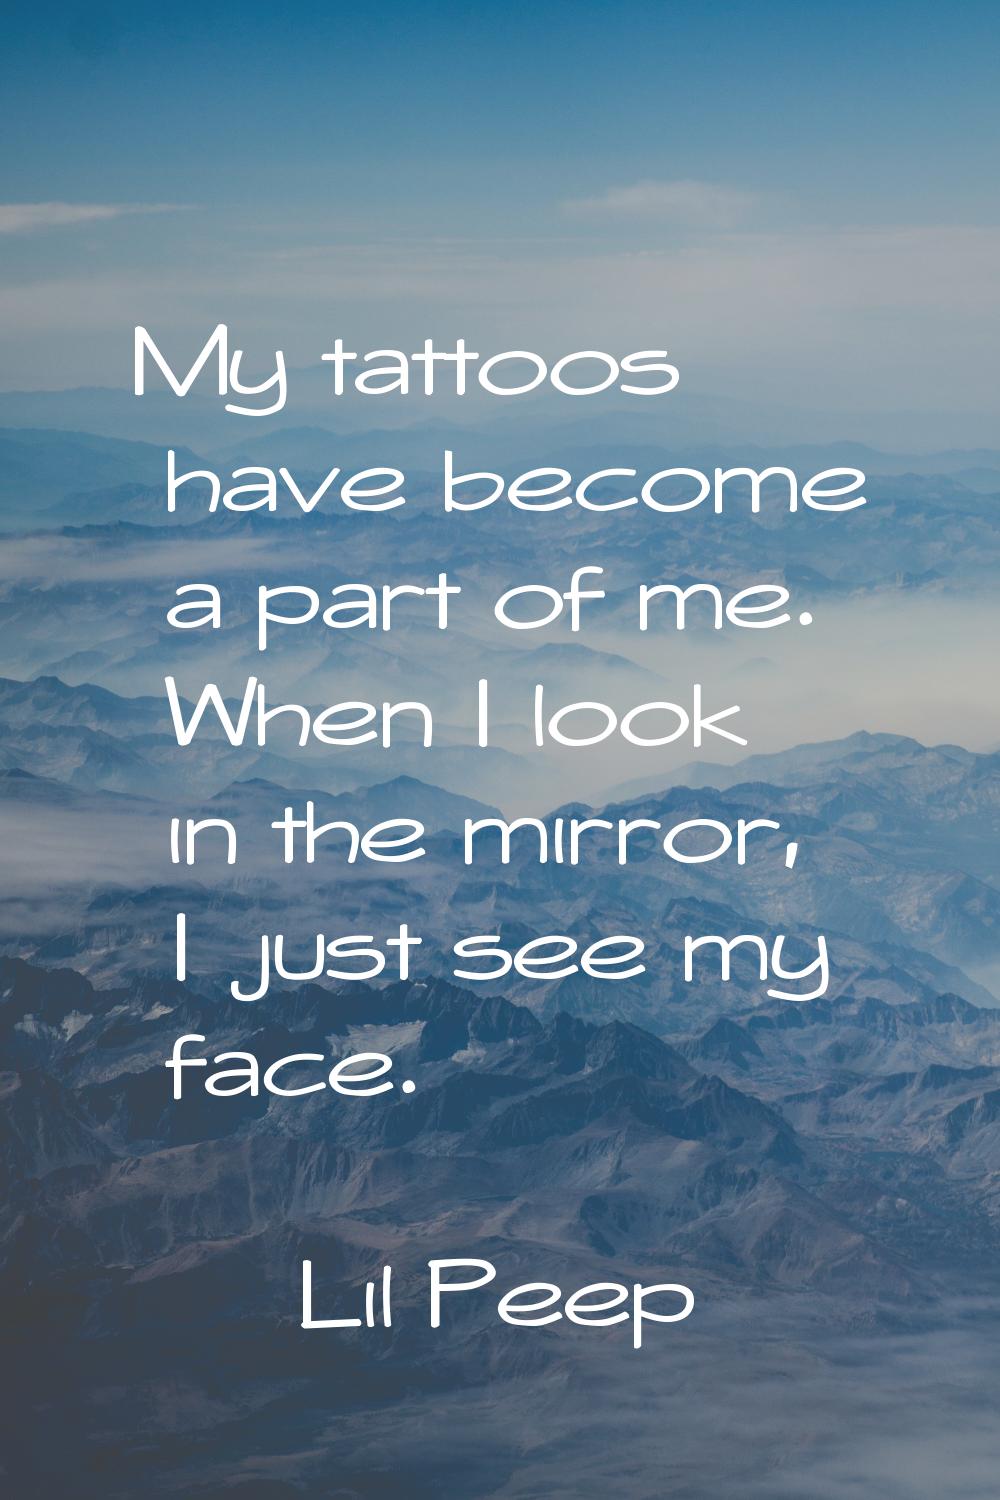 My tattoos have become a part of me. When I look in the mirror, I just see my face.